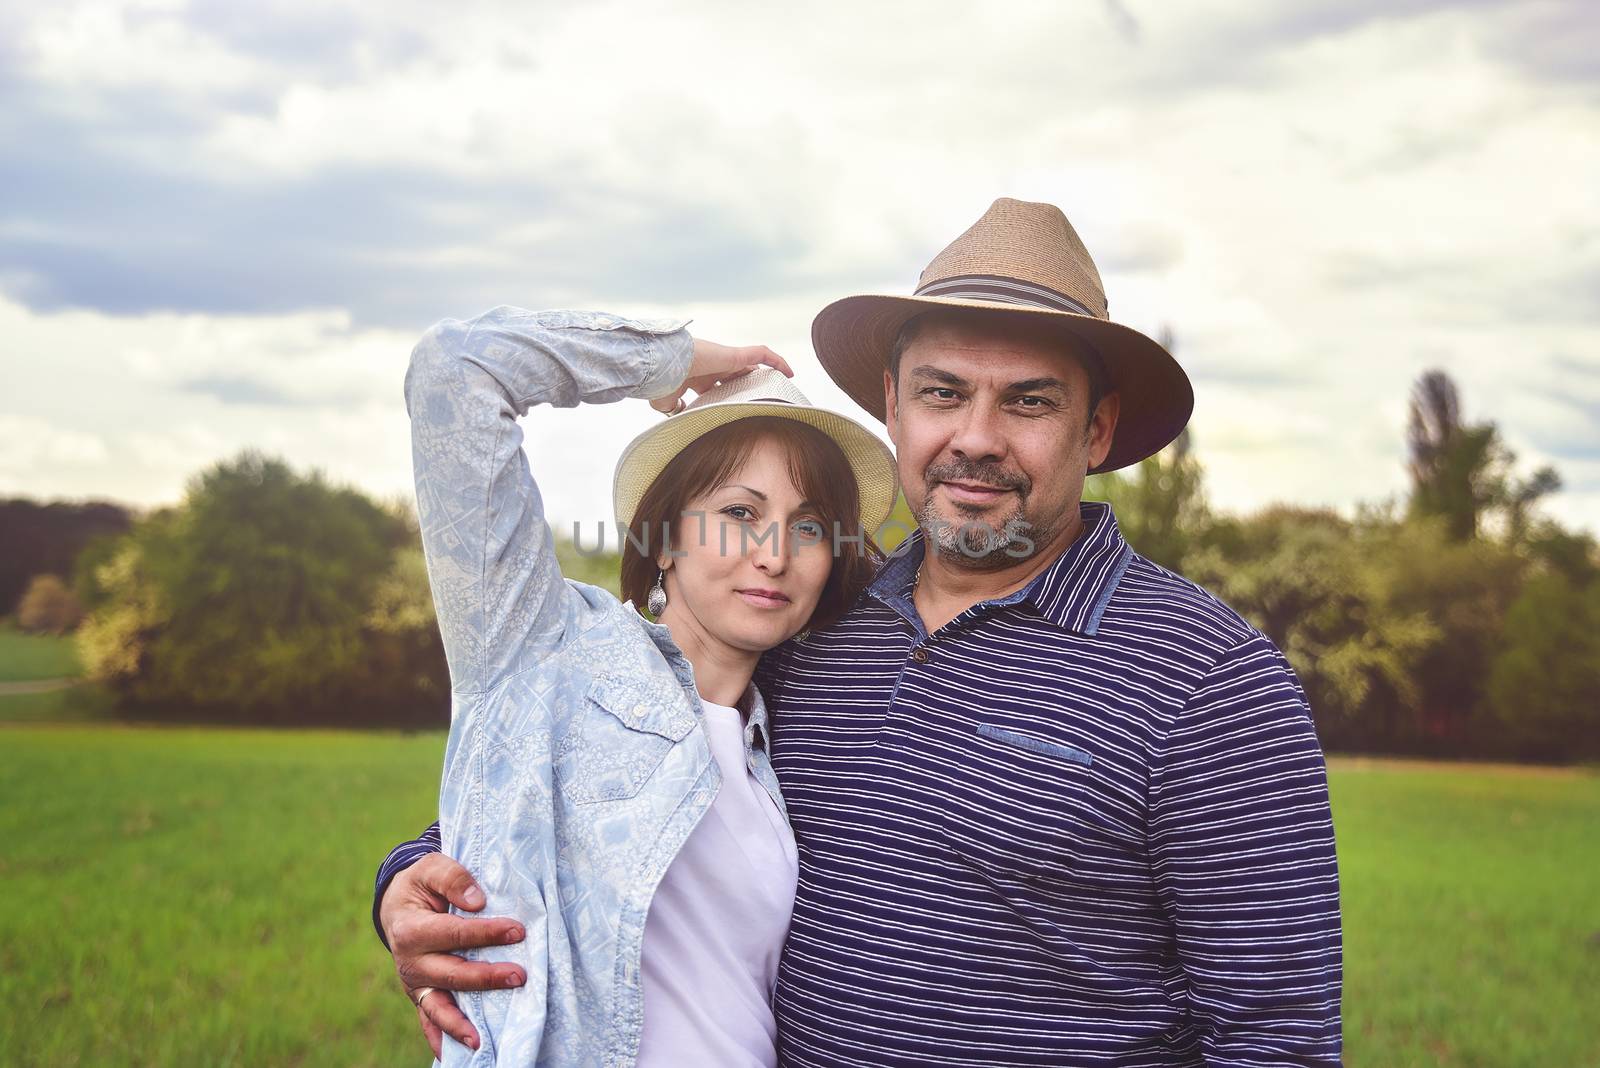 photo portrait of a happy middle-aged couple in nature by Nickstock